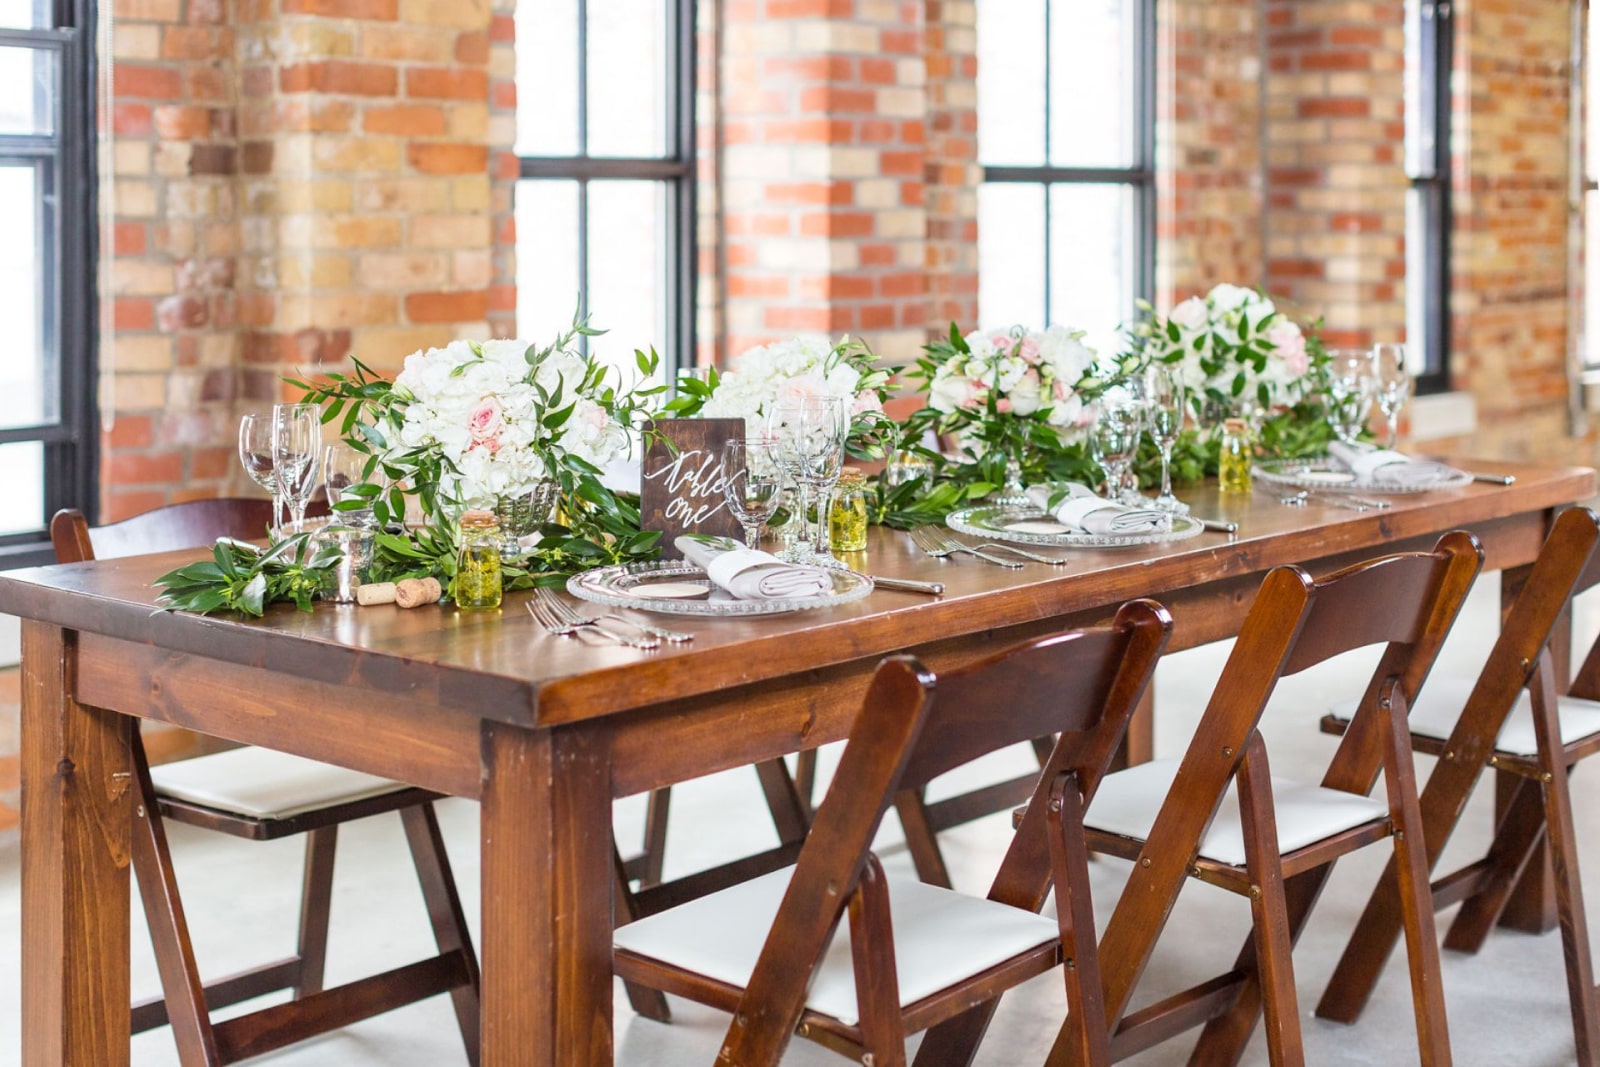 A set table at a wedding reception held at The Loft on King